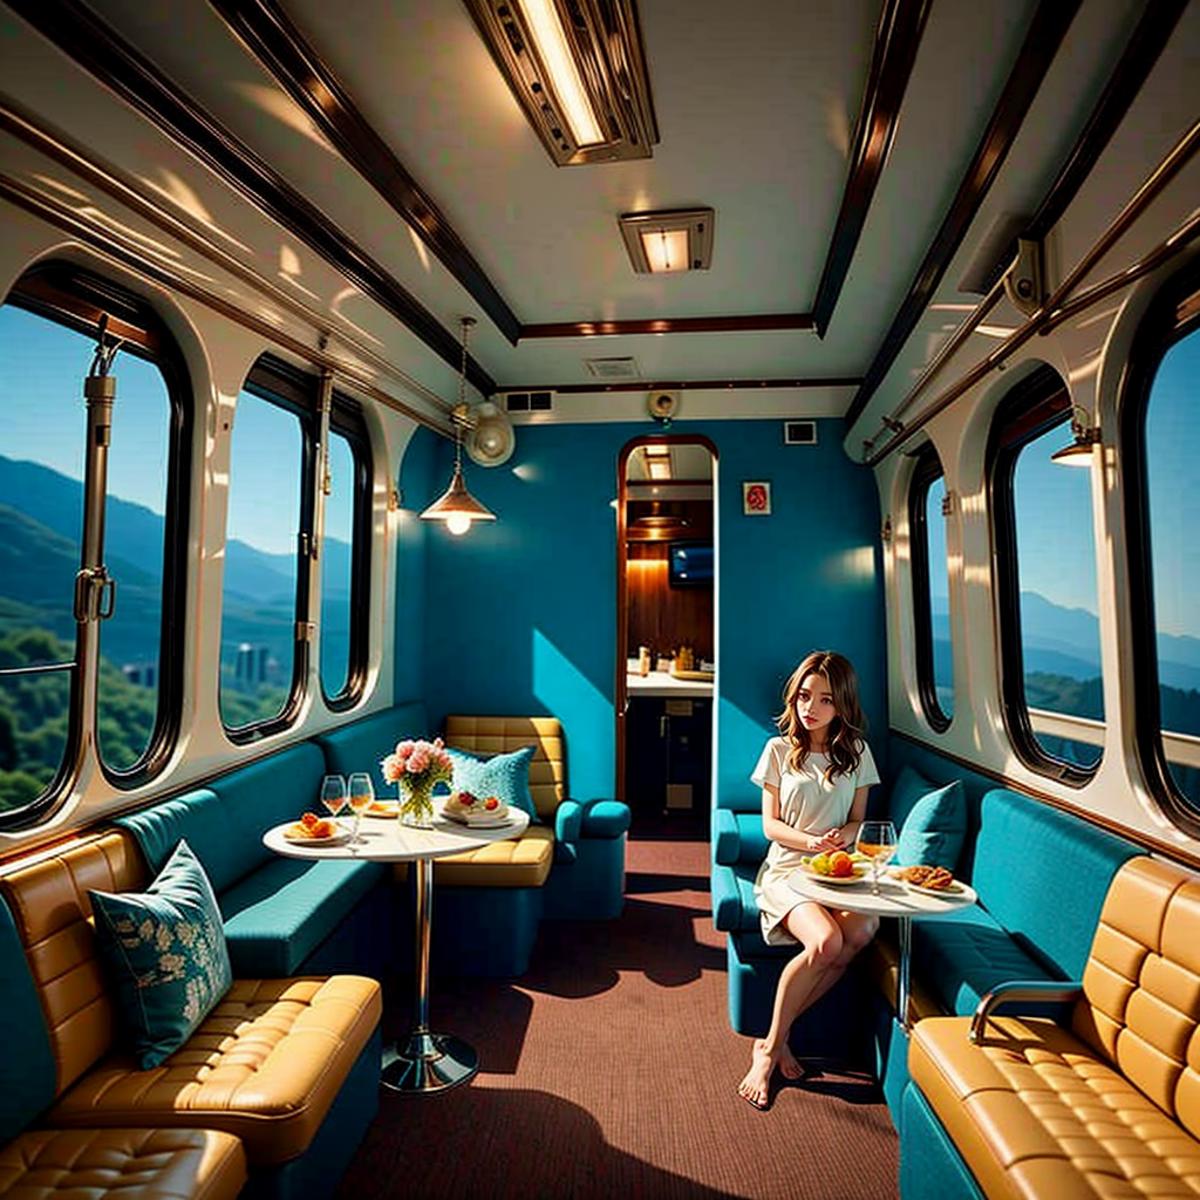 train_compartment image by tlscope222